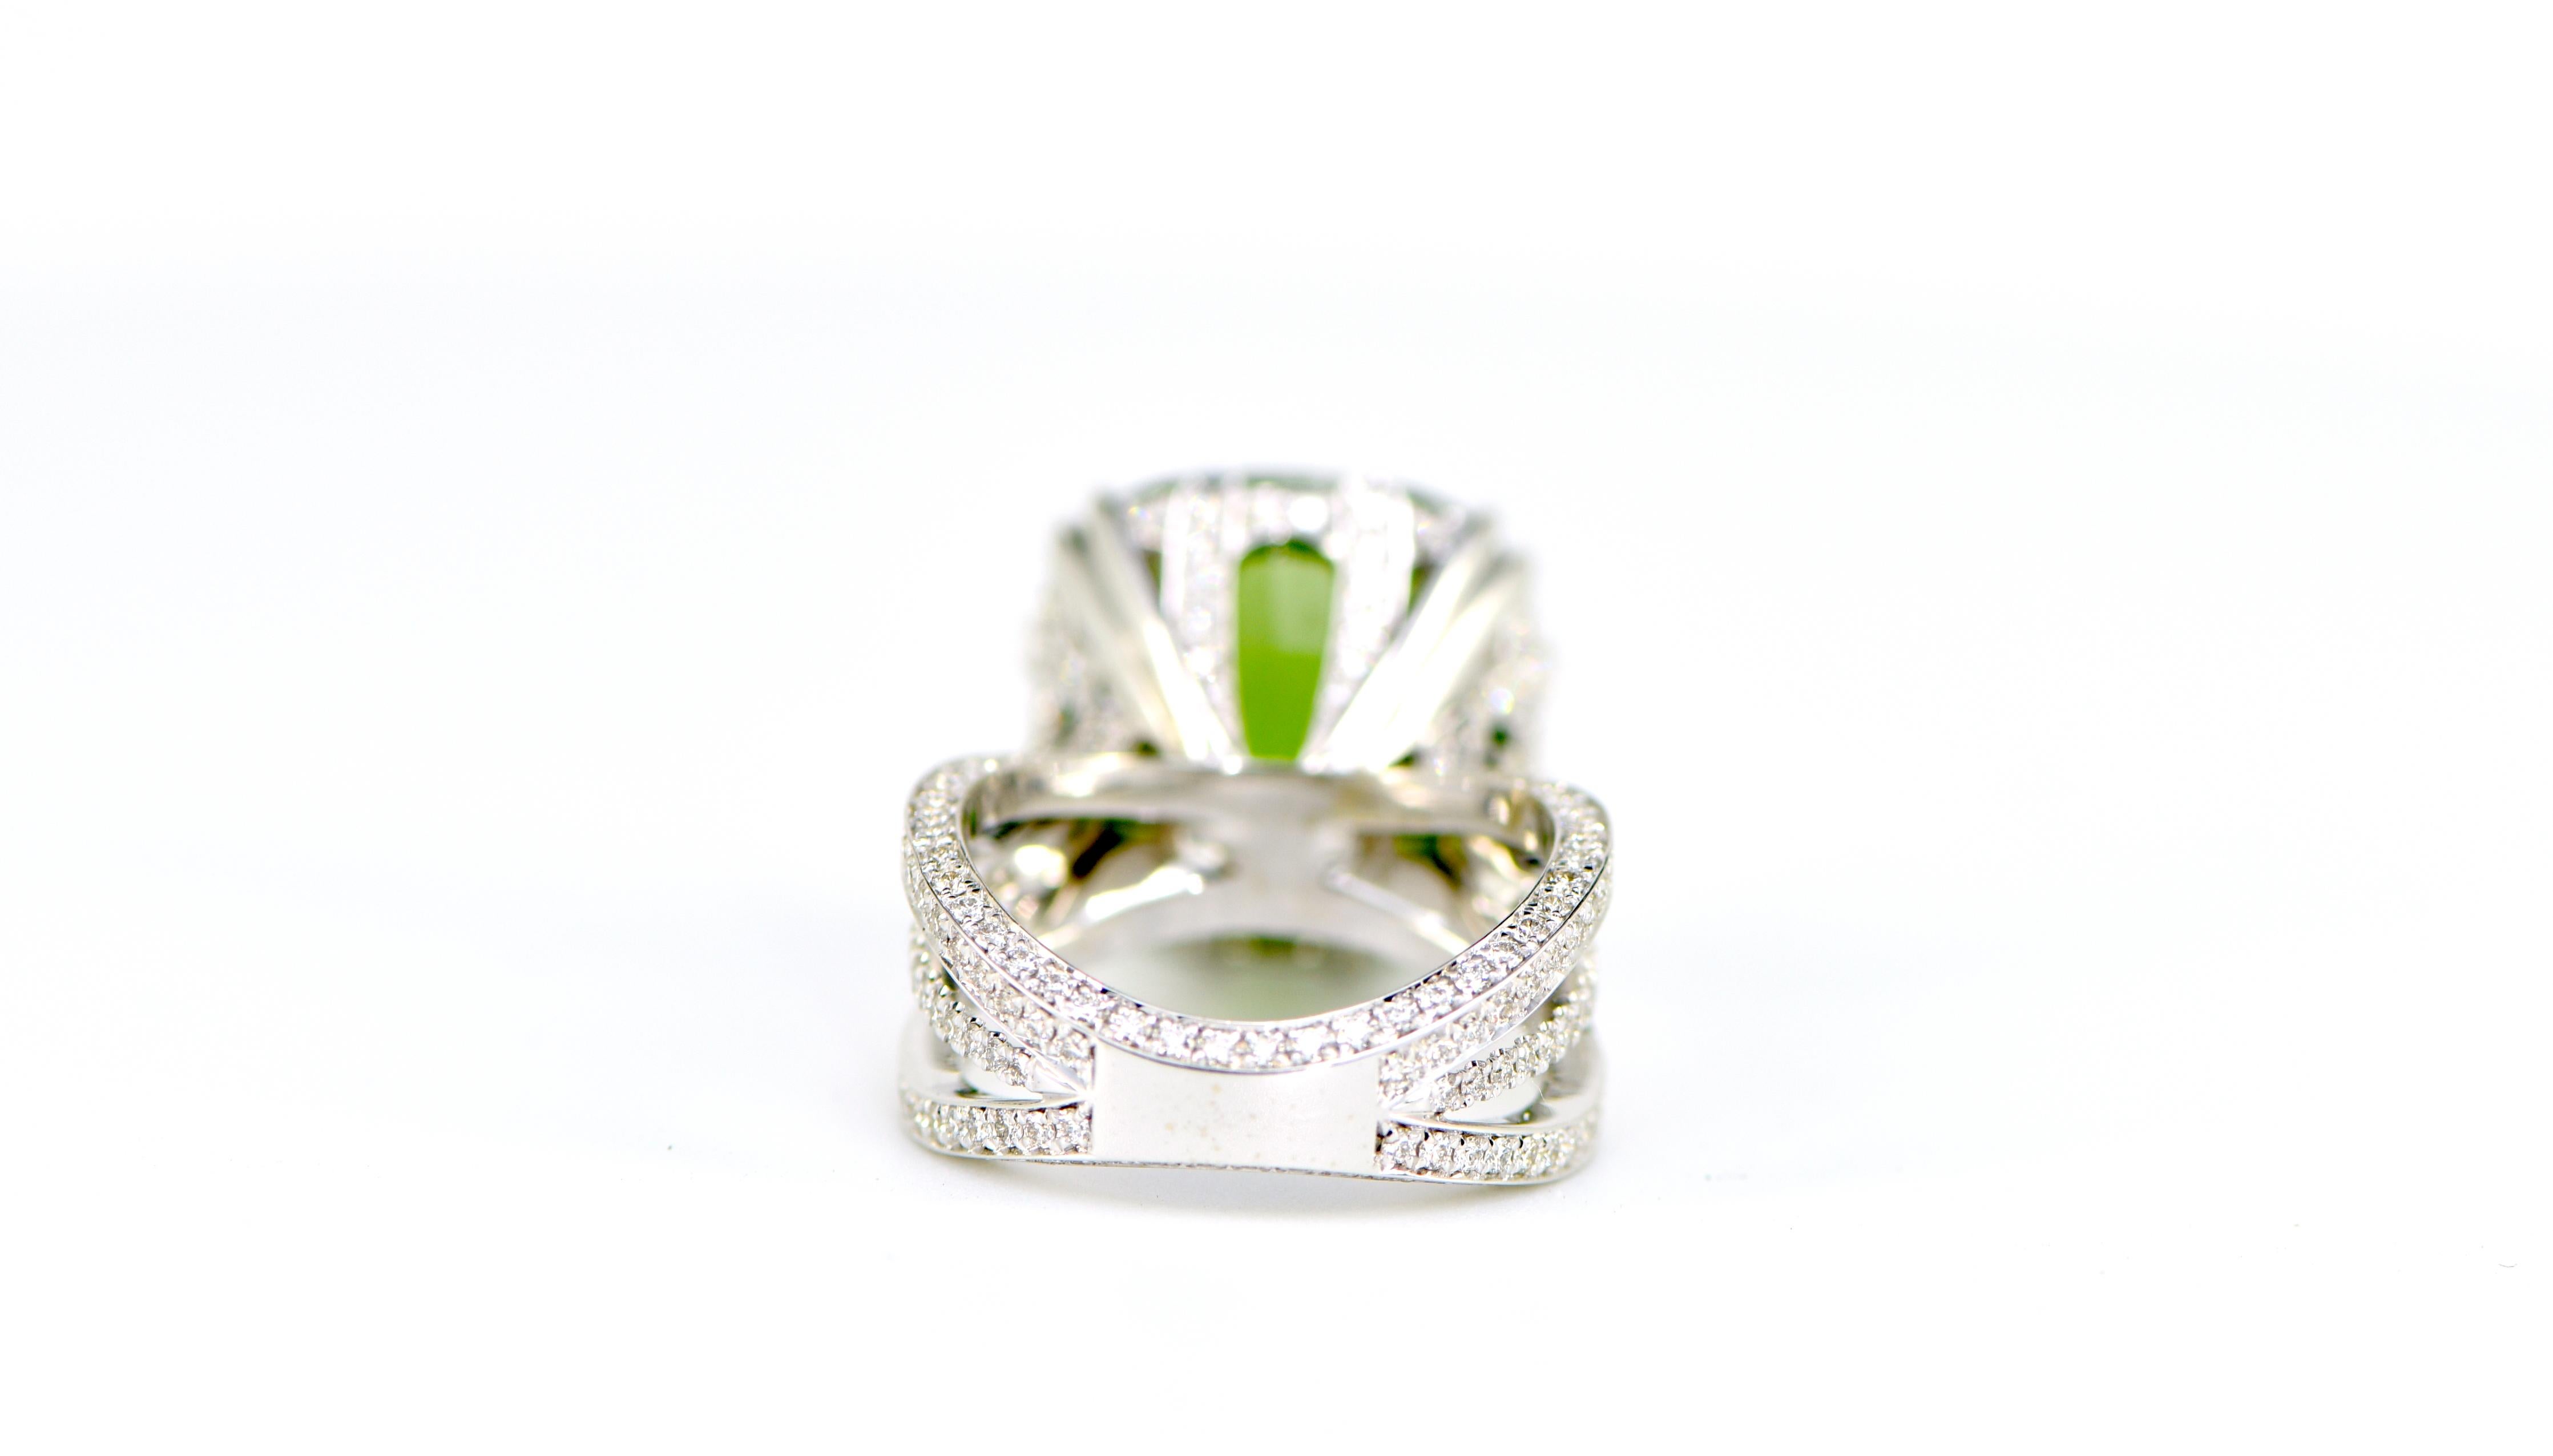  Introducing a stunning and eye-catching Burmese cushion cut peridot ring, set in luxurious 18 karat white gold. The center stone, an impressive 18.72ct peridot, radiates with a rich and vivid green color, making it the perfect statement piece for